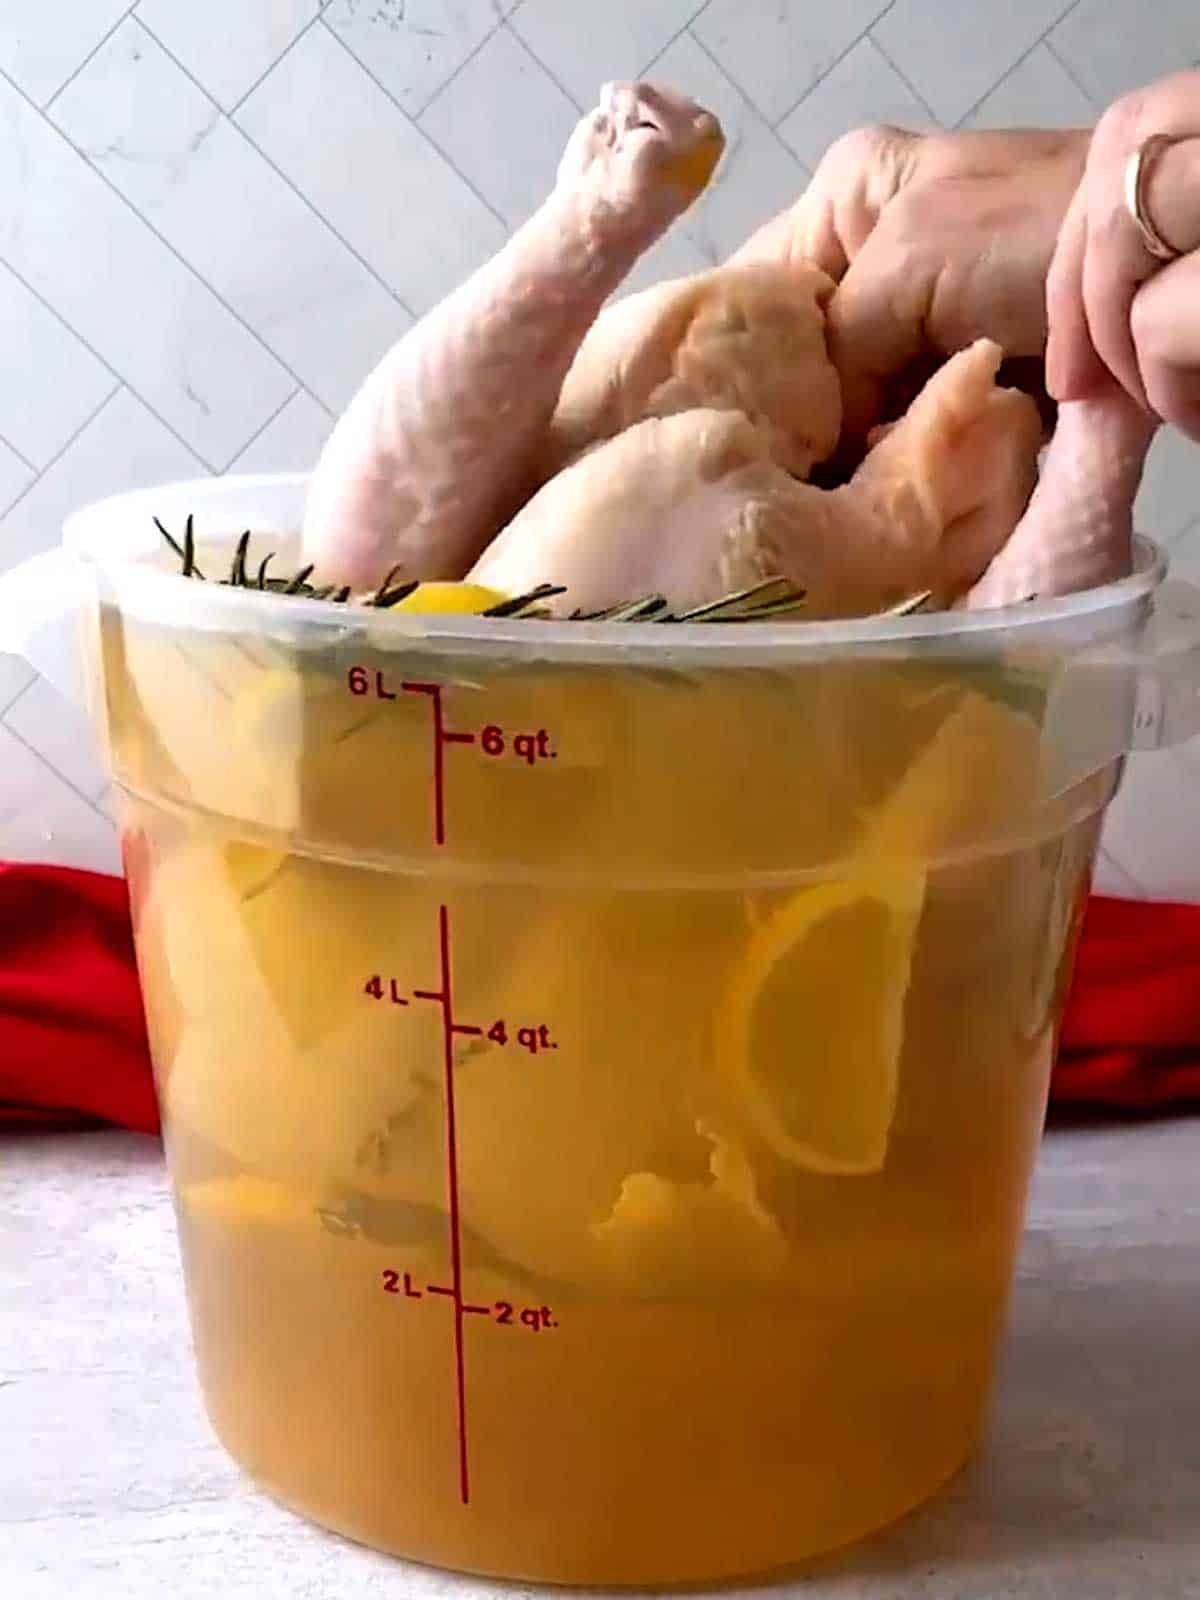 Placing the chicken in the brine.